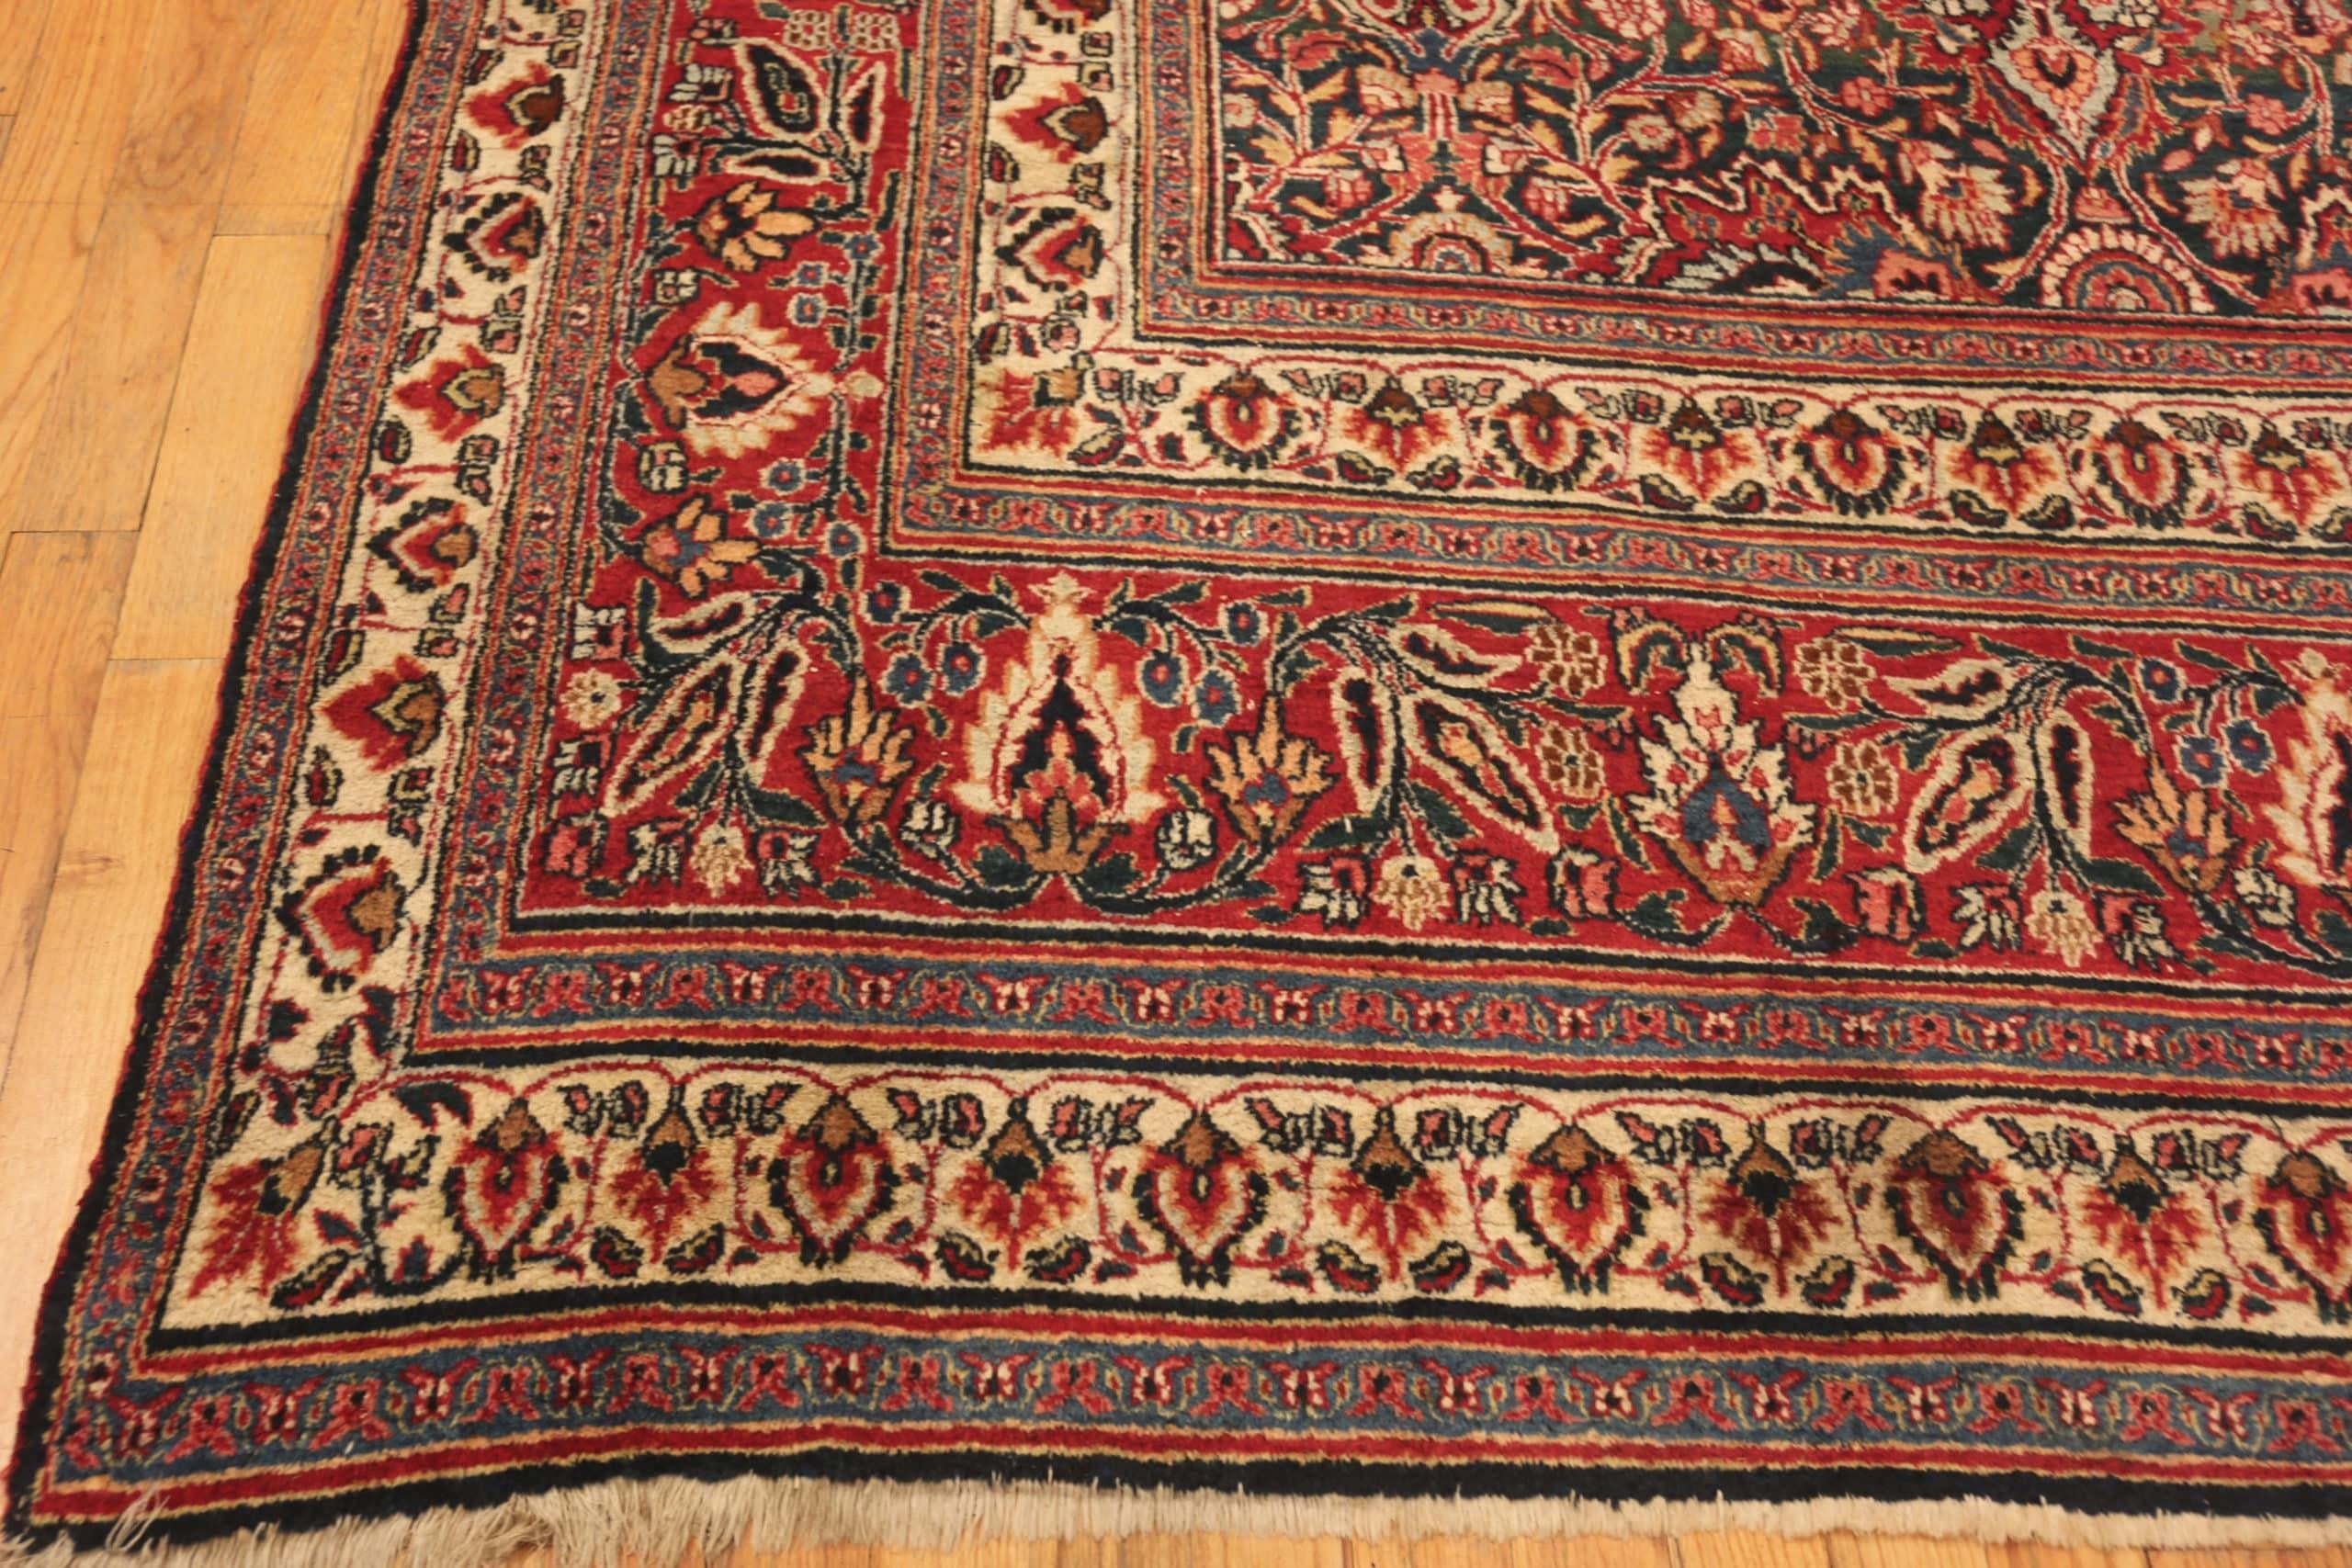 Large Antique Persian Khorassan Rug. 11 ft 10 in x 17 ft In Good Condition For Sale In New York, NY